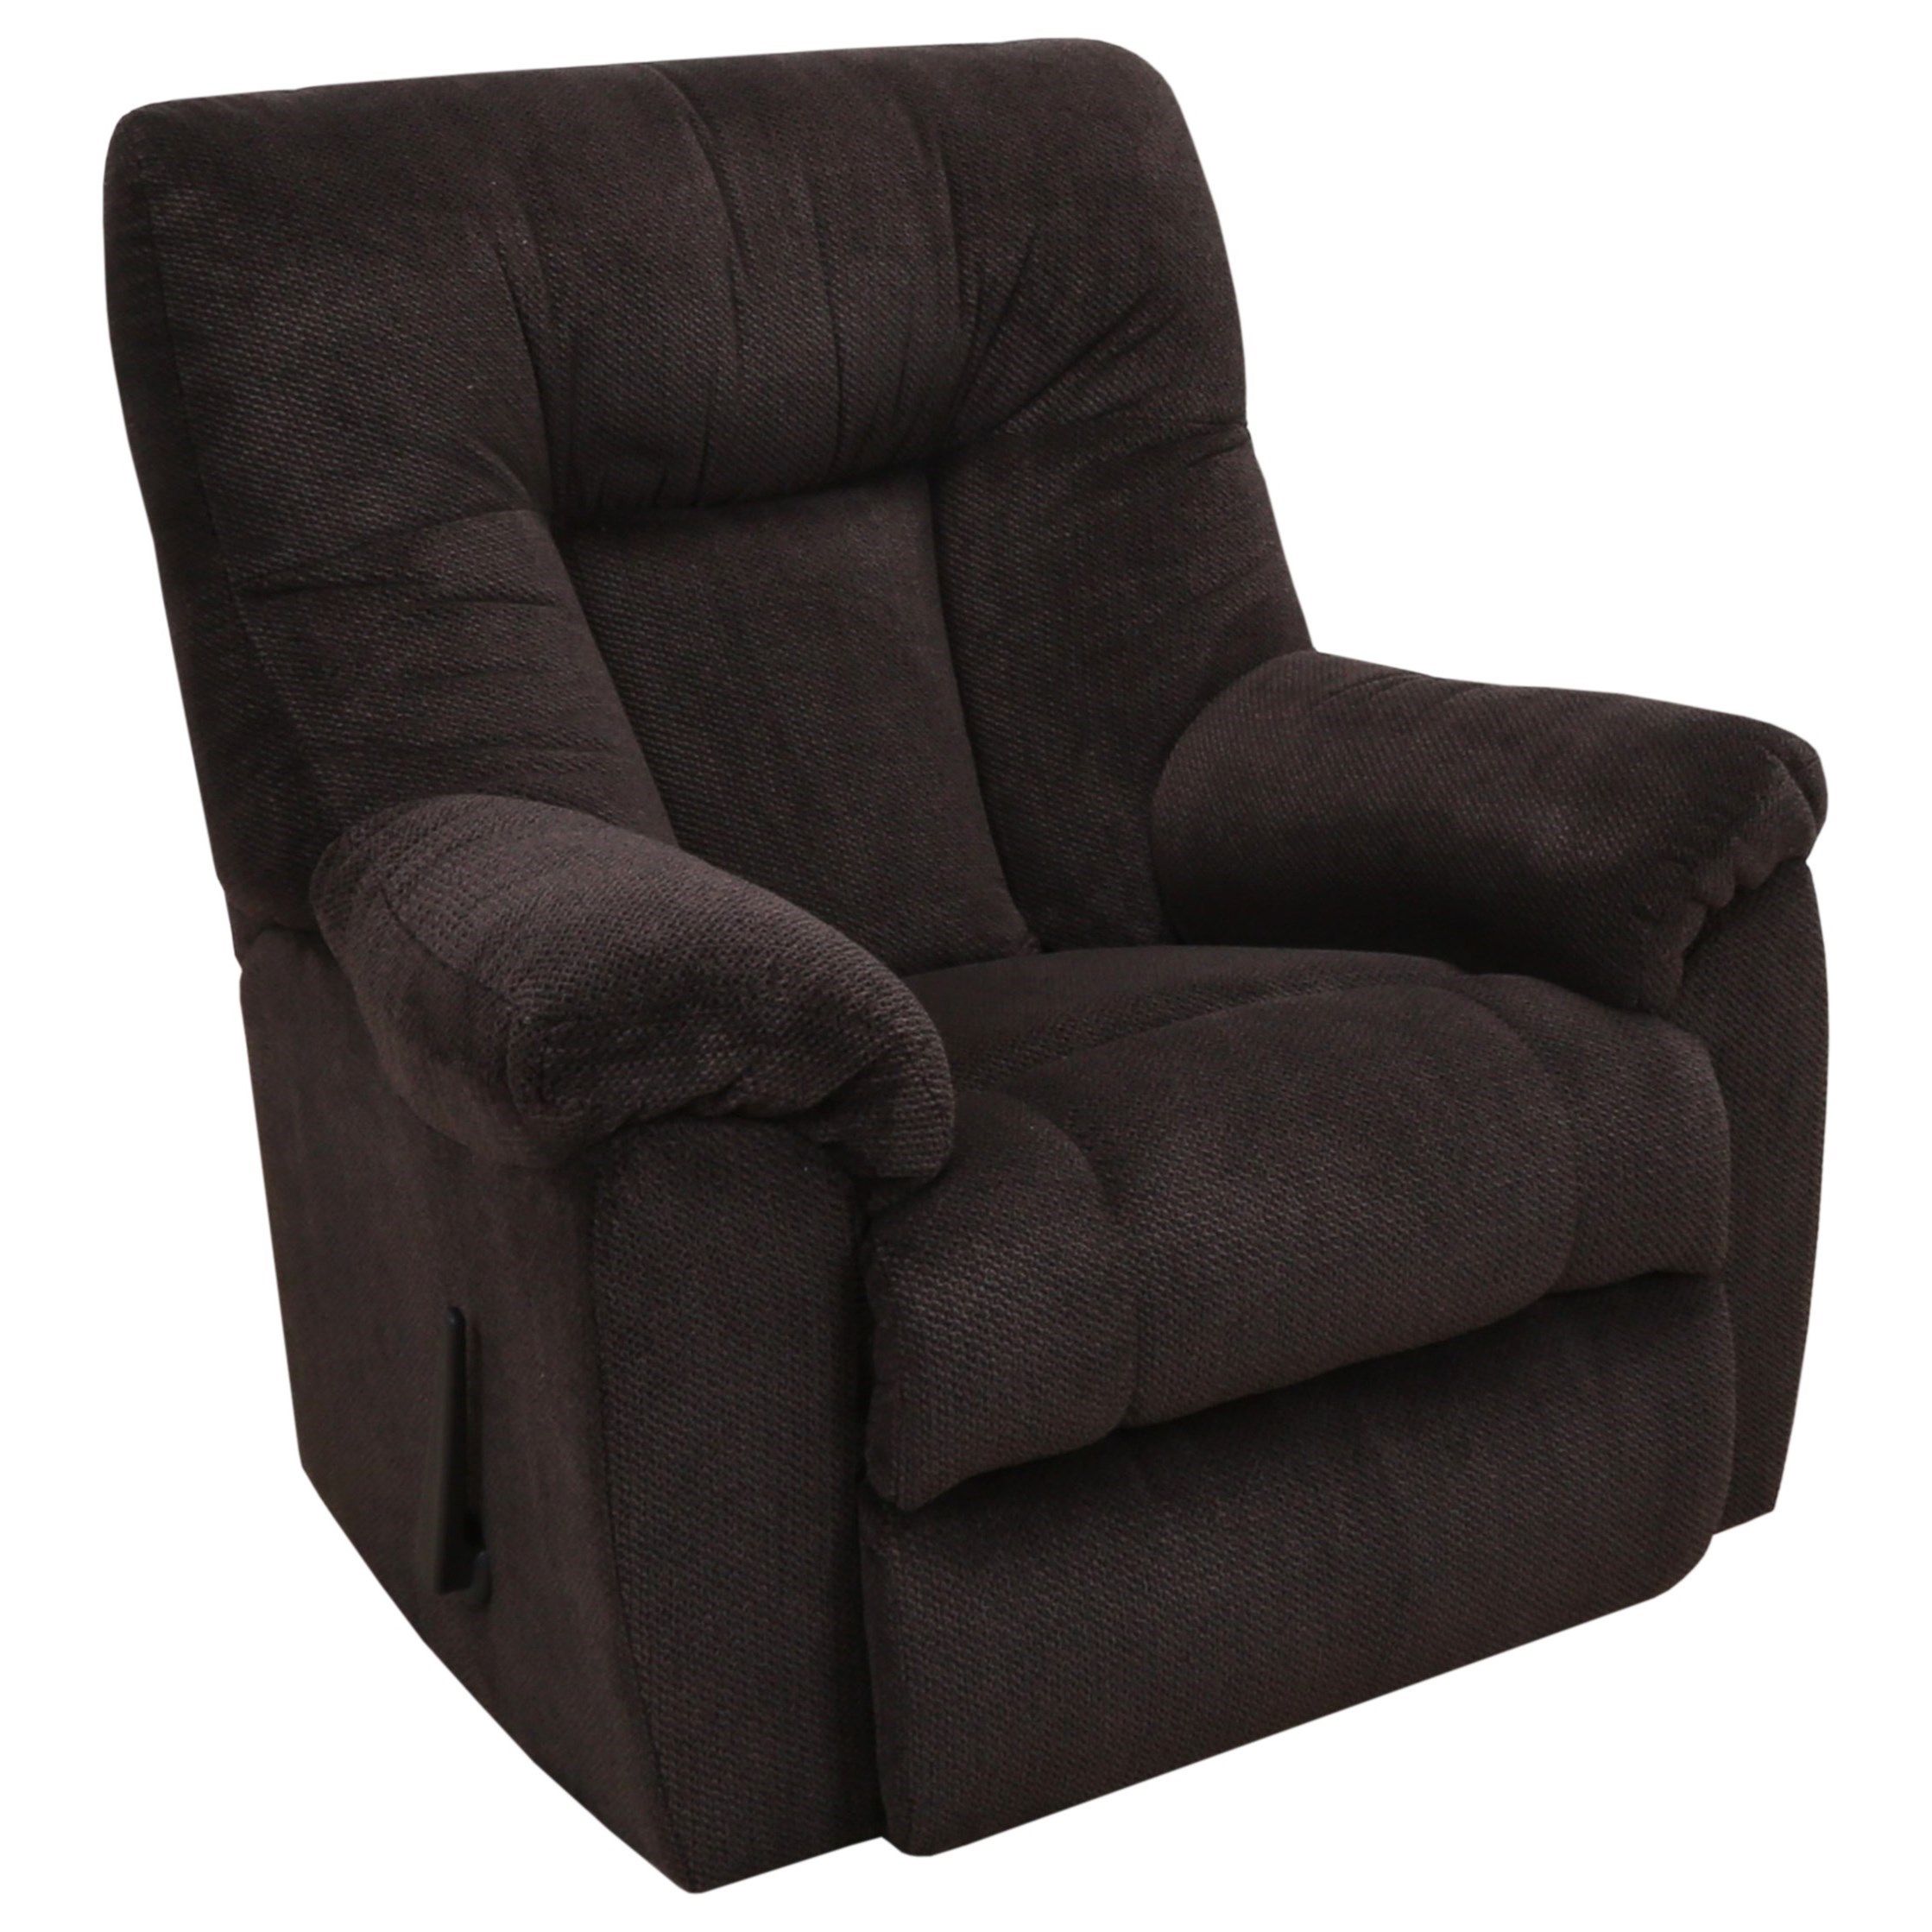 Franklin Franklin Recliners Connery Rocker Recliner | Miskelly For Franco Iii Fabric Swivel Rocker Recliners (Photo 4 of 20)